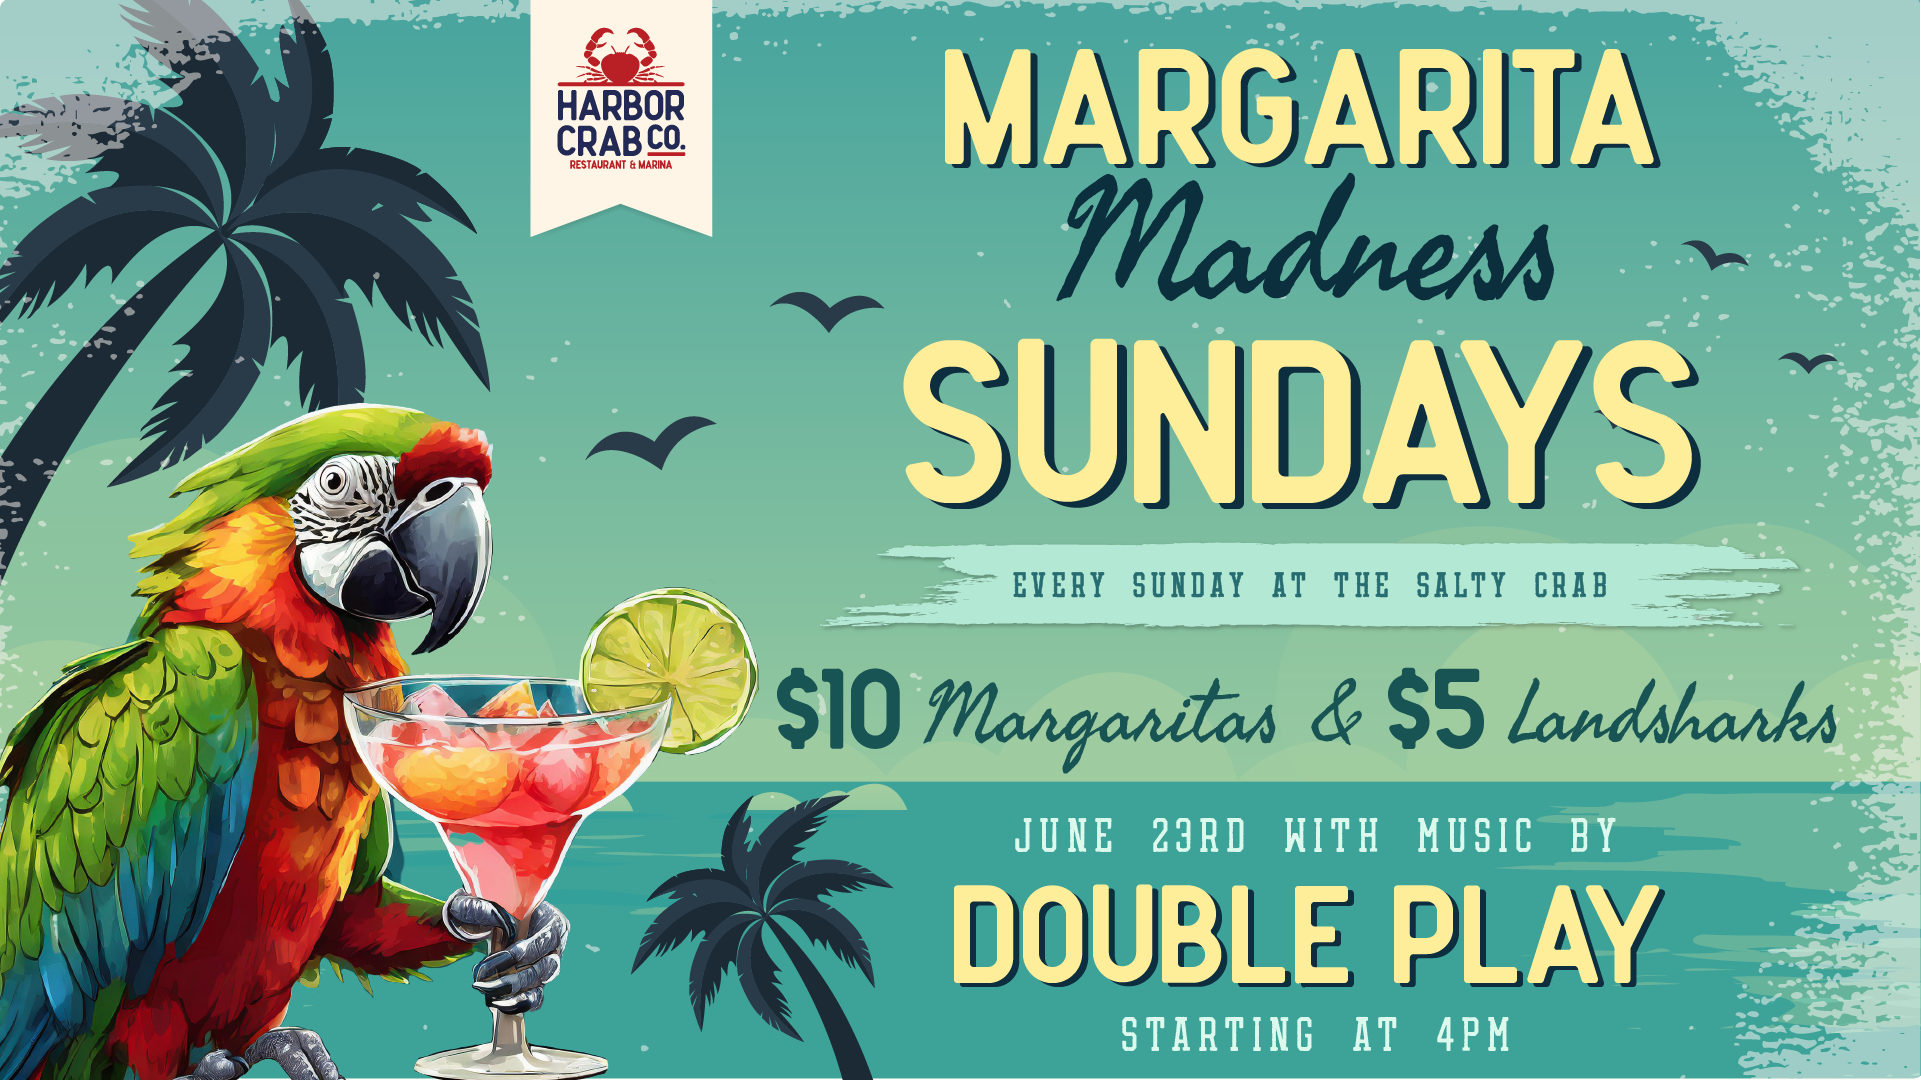 Margarita Madness Sundays with $10 margaritas, $5 Landsharks, and Double Play on June 23rd at 4pm.